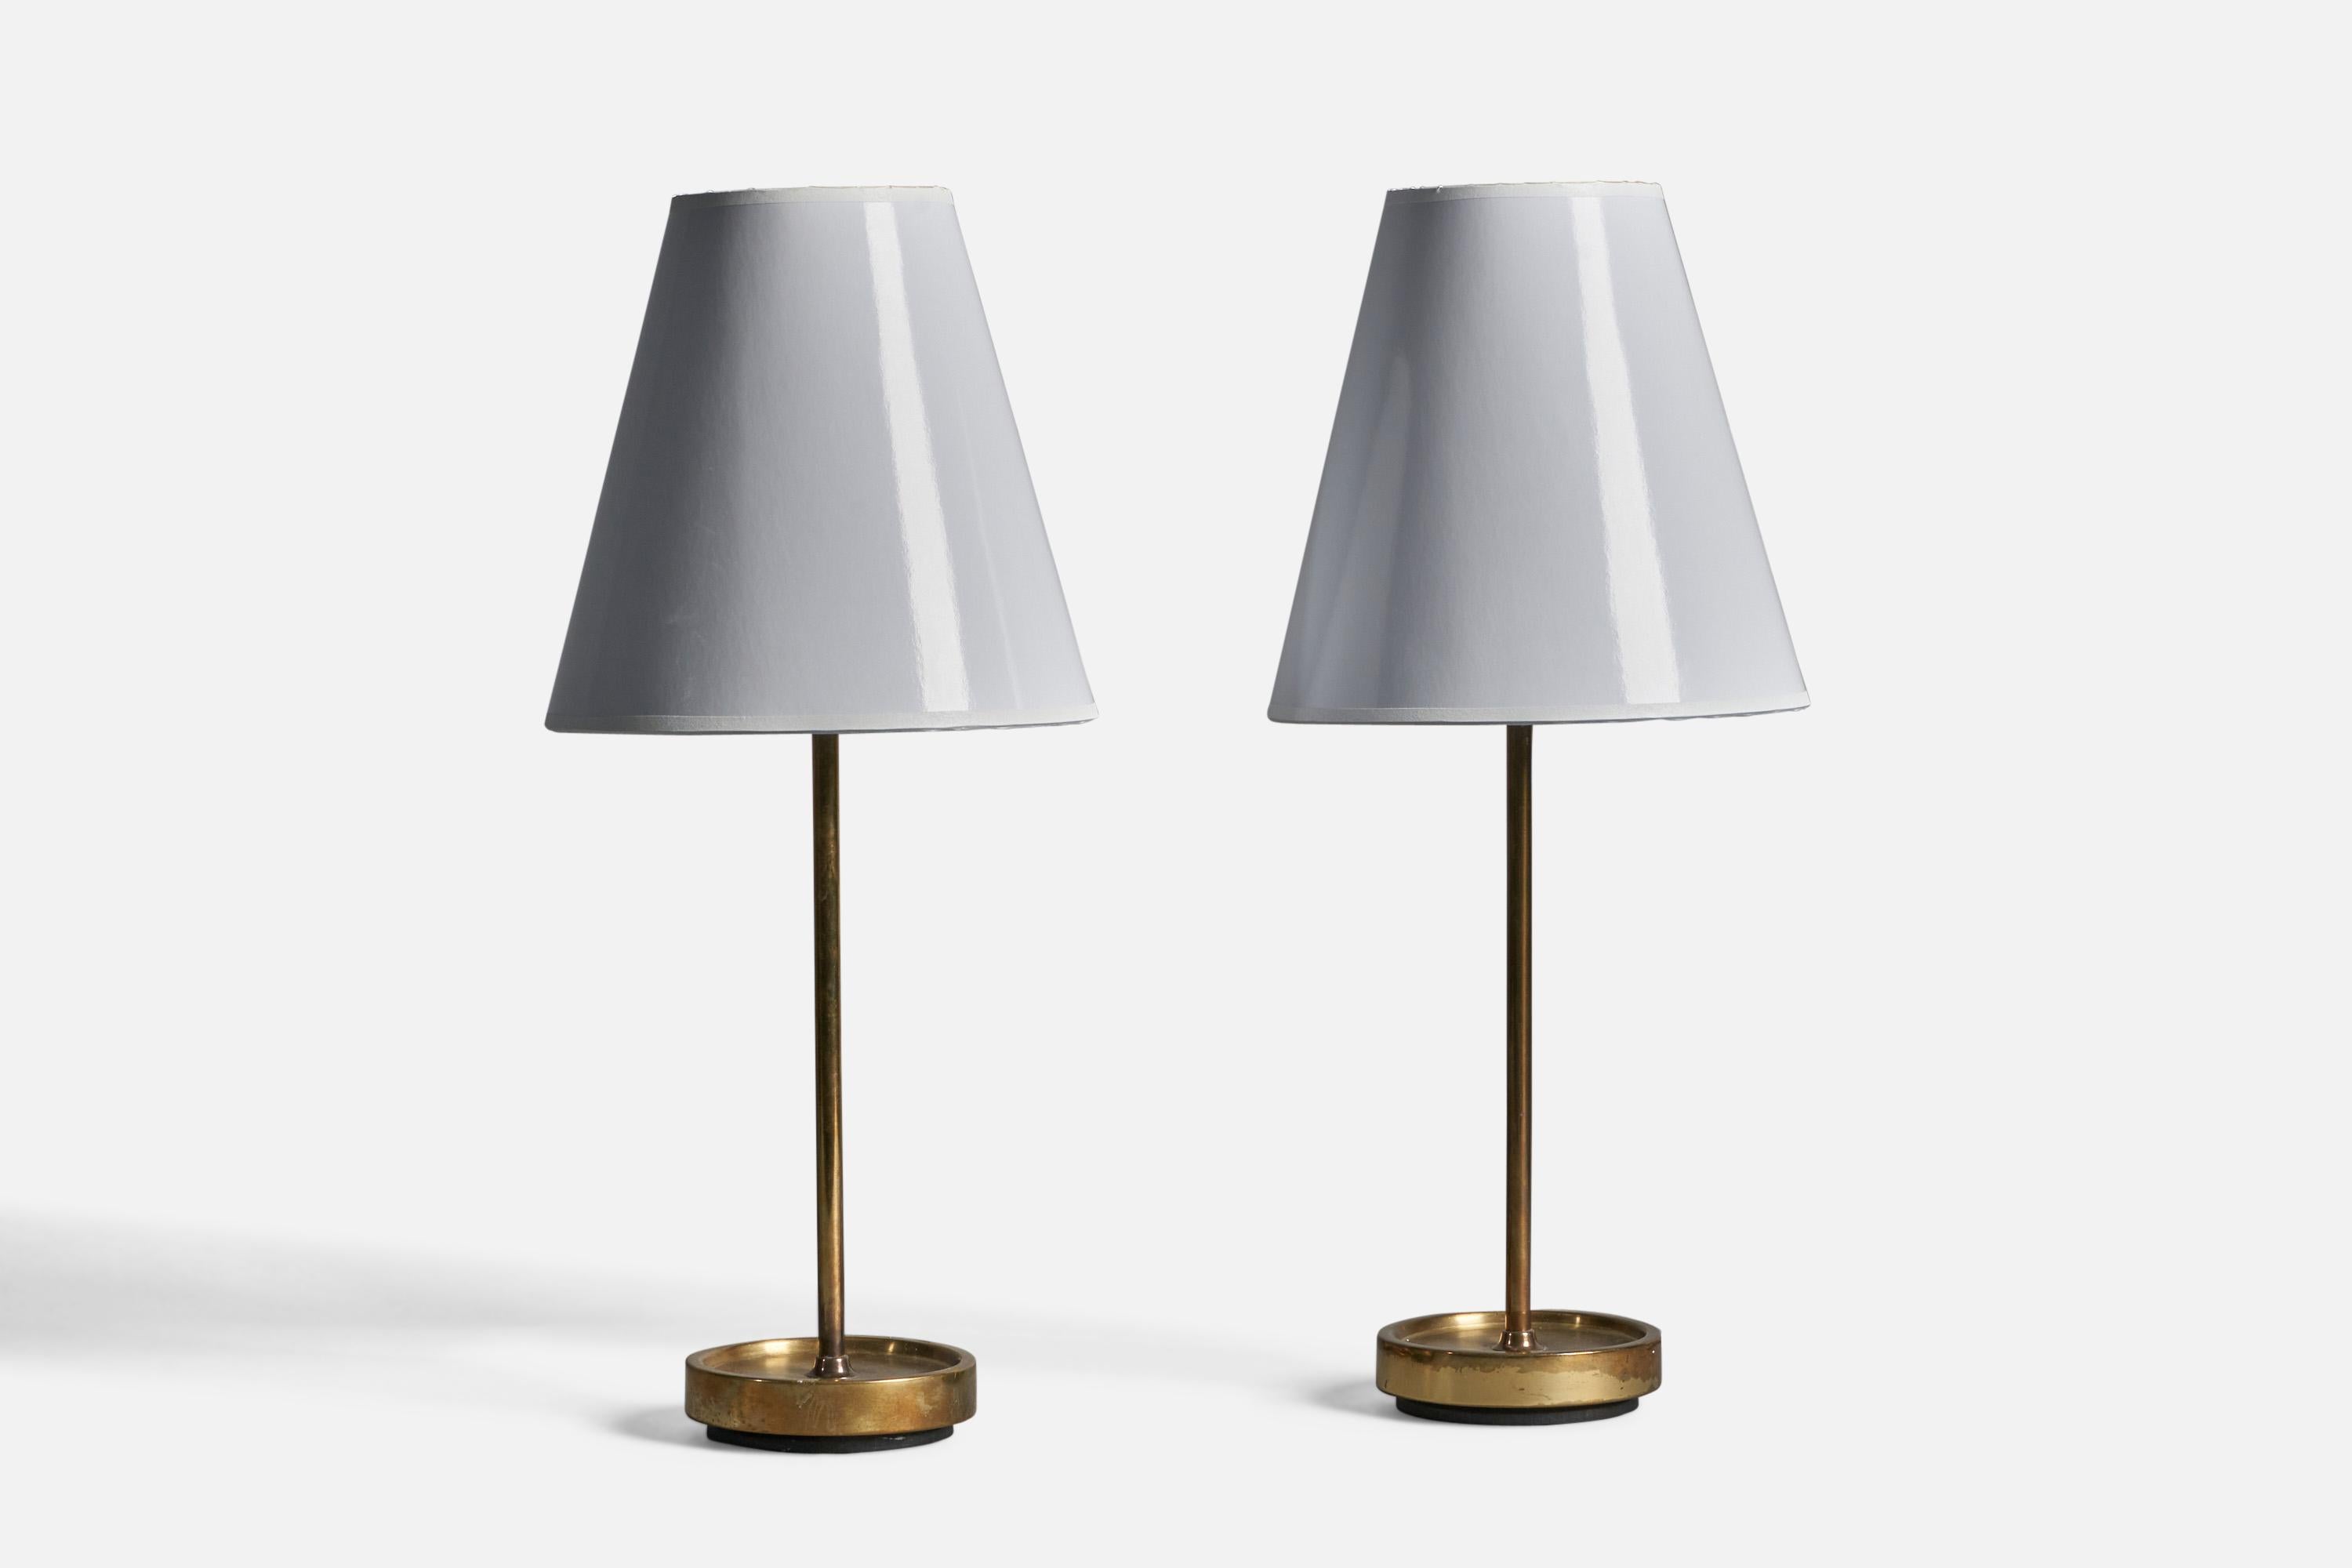 A pair of brass table lamps designed and produced in Sweden, 1950s.

Dimensions of Lamp (inches): 14.75